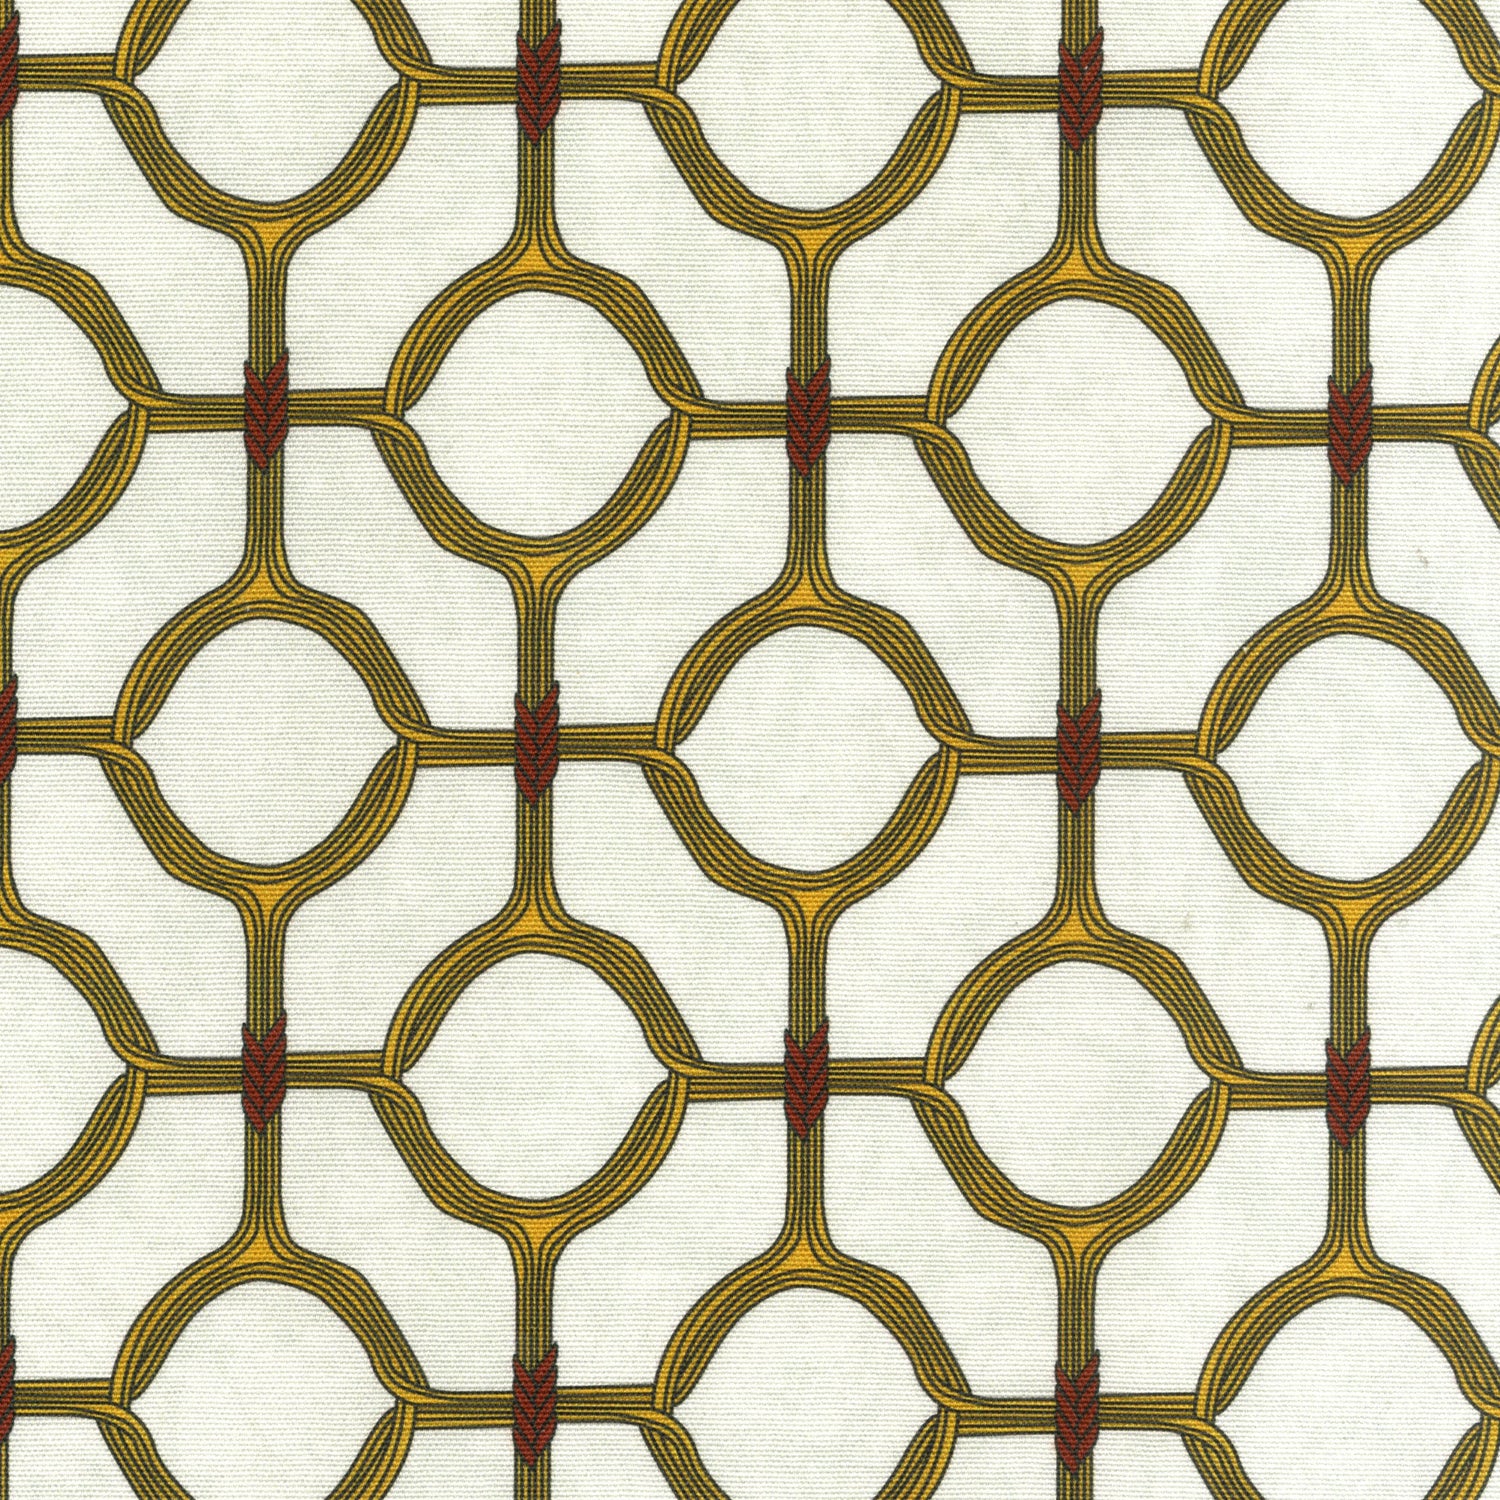 Detail of fabric in a rounded lattice print in yellow and red on a mottled cream field.